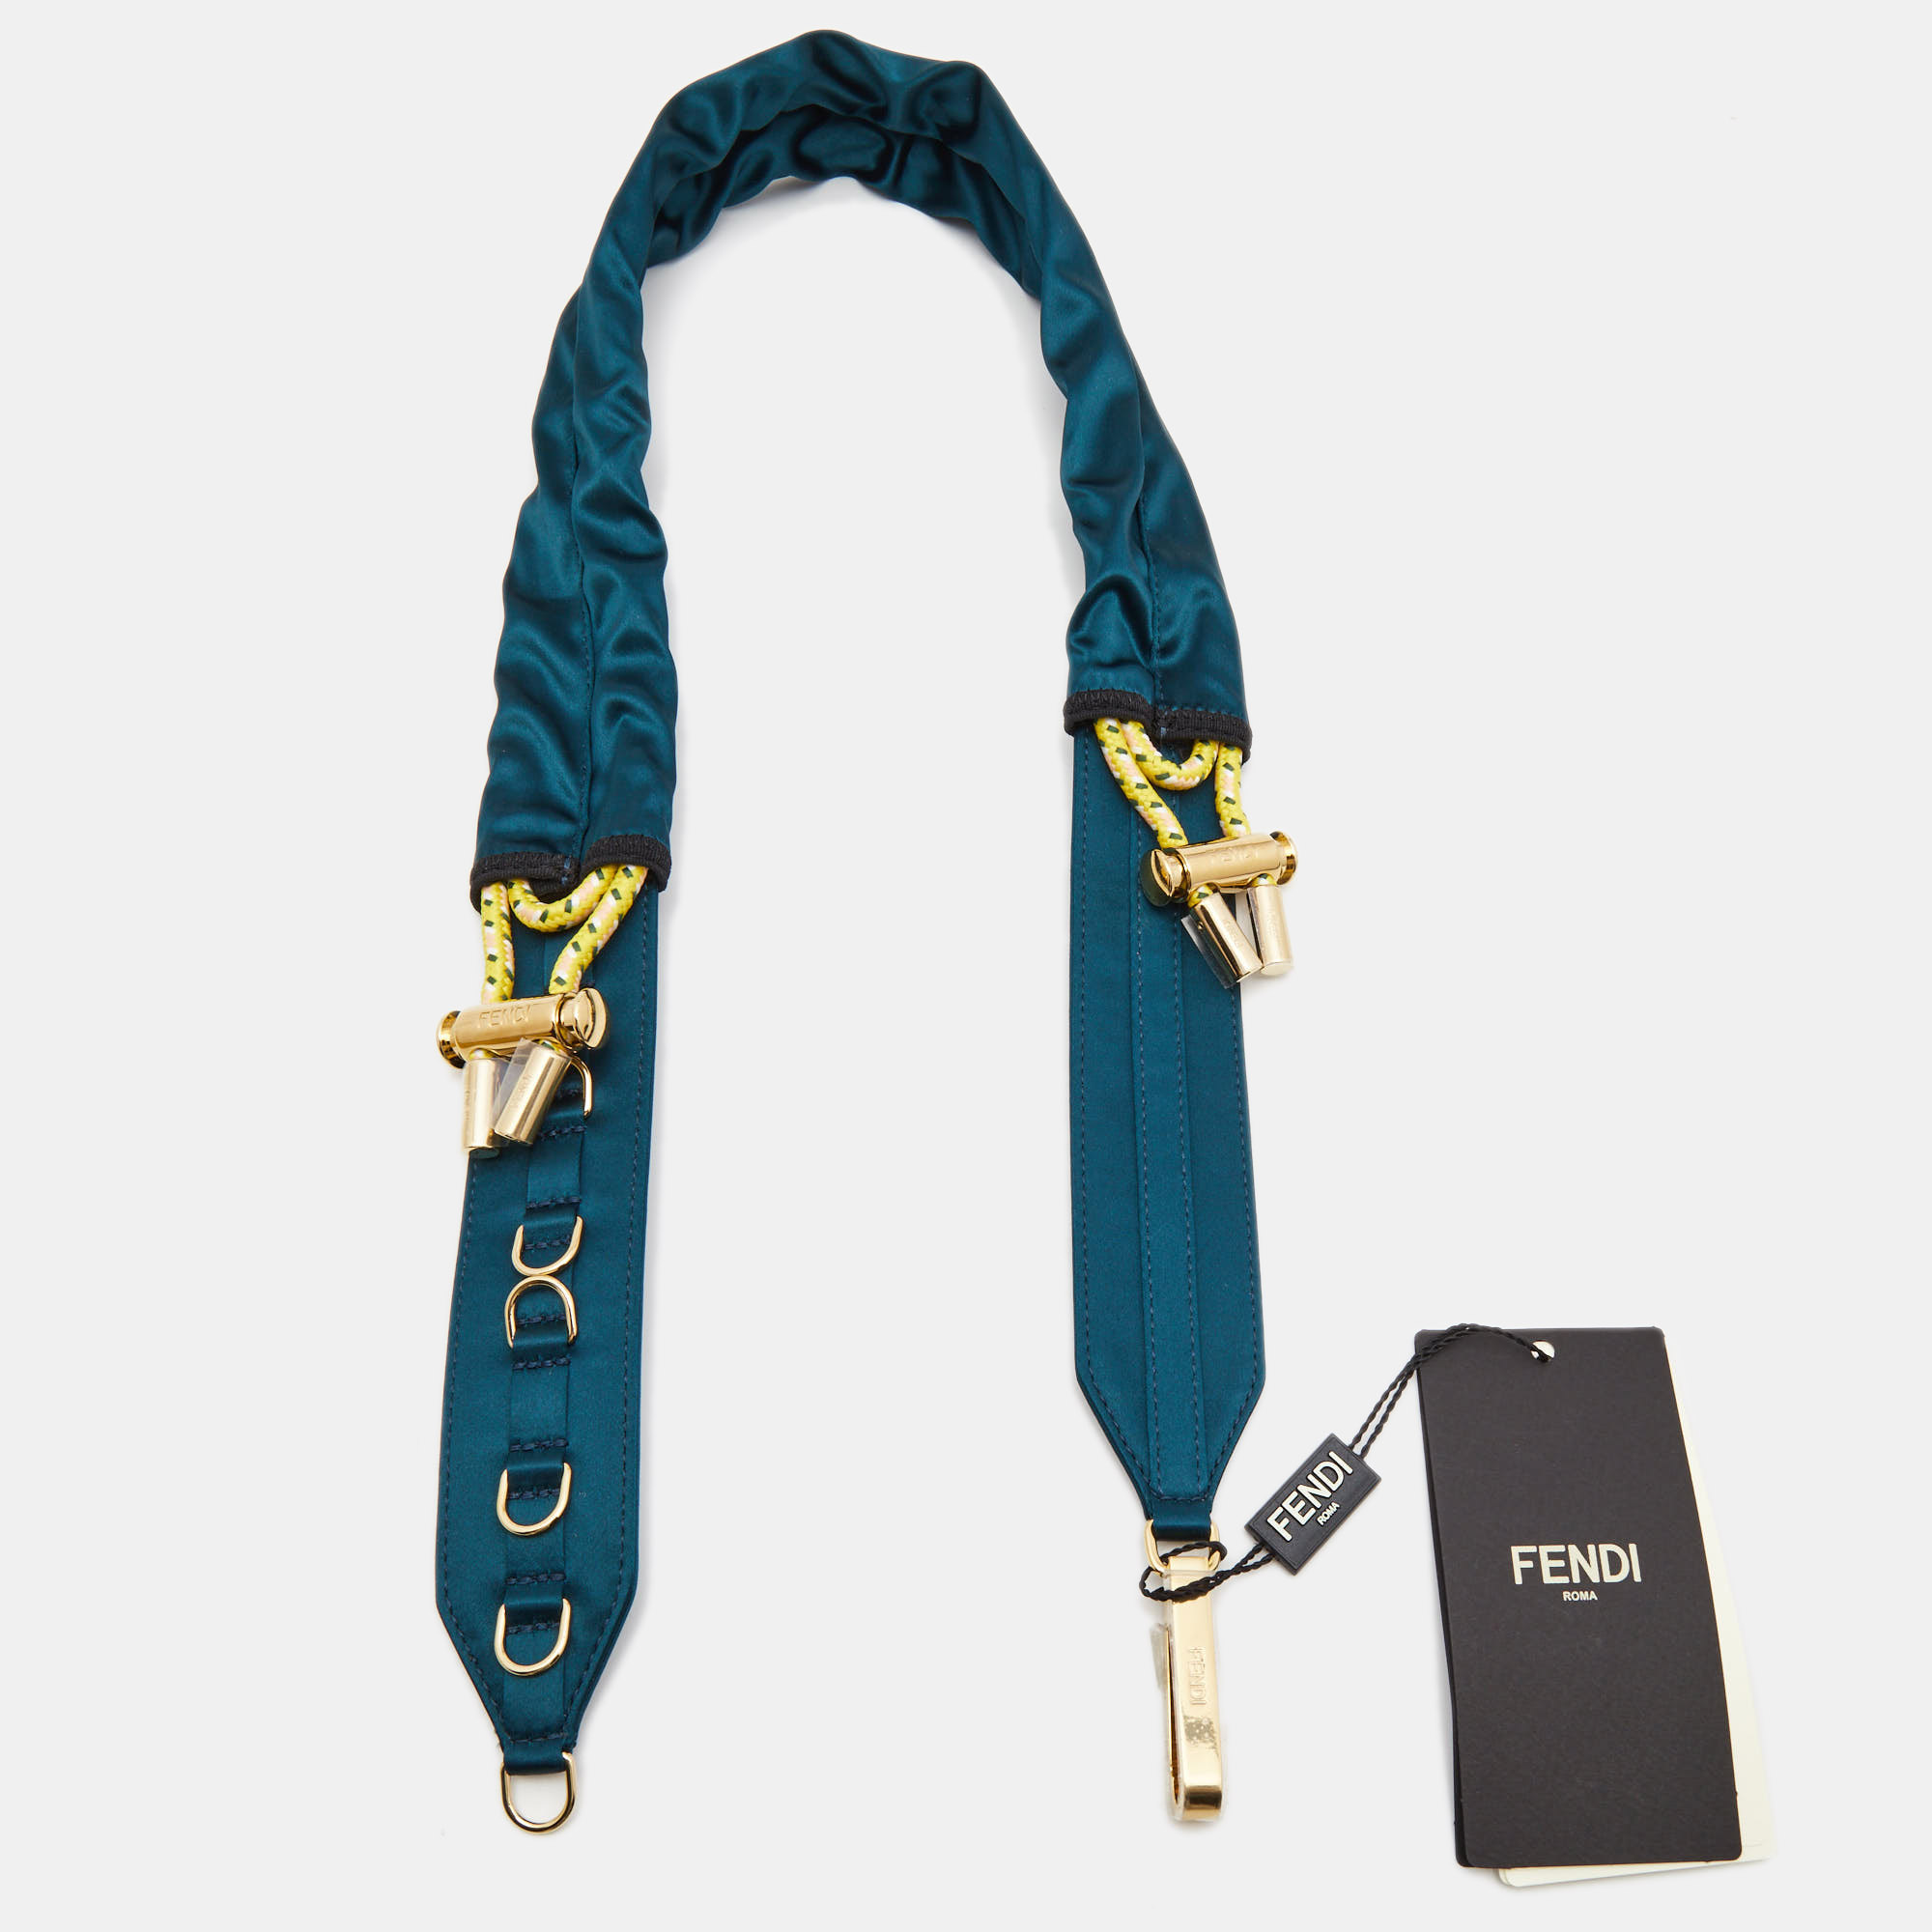 Enhance your style with the Fendi shoulder strap. Crafted with luxurious satin and adorned with a teal shade this exquisite accessory adds a touch of elegance and sophistication to your handbag making it a must have for fashion enthusiasts.